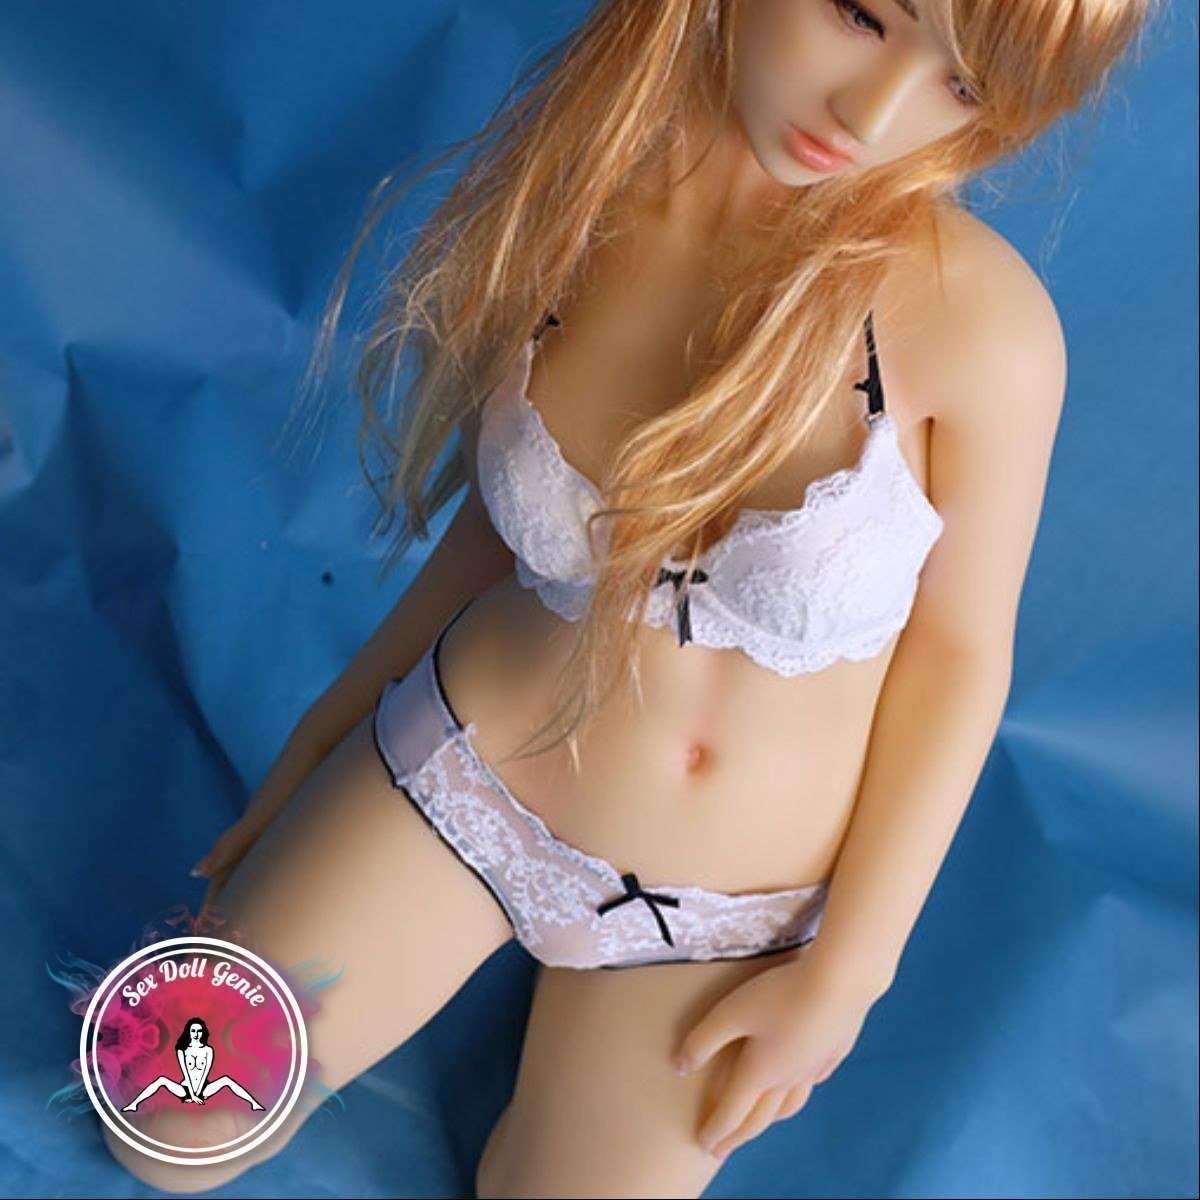 DS Doll - 158cm - Samantha (Elf) Head - Type 2 D Cup Silicone Doll-13